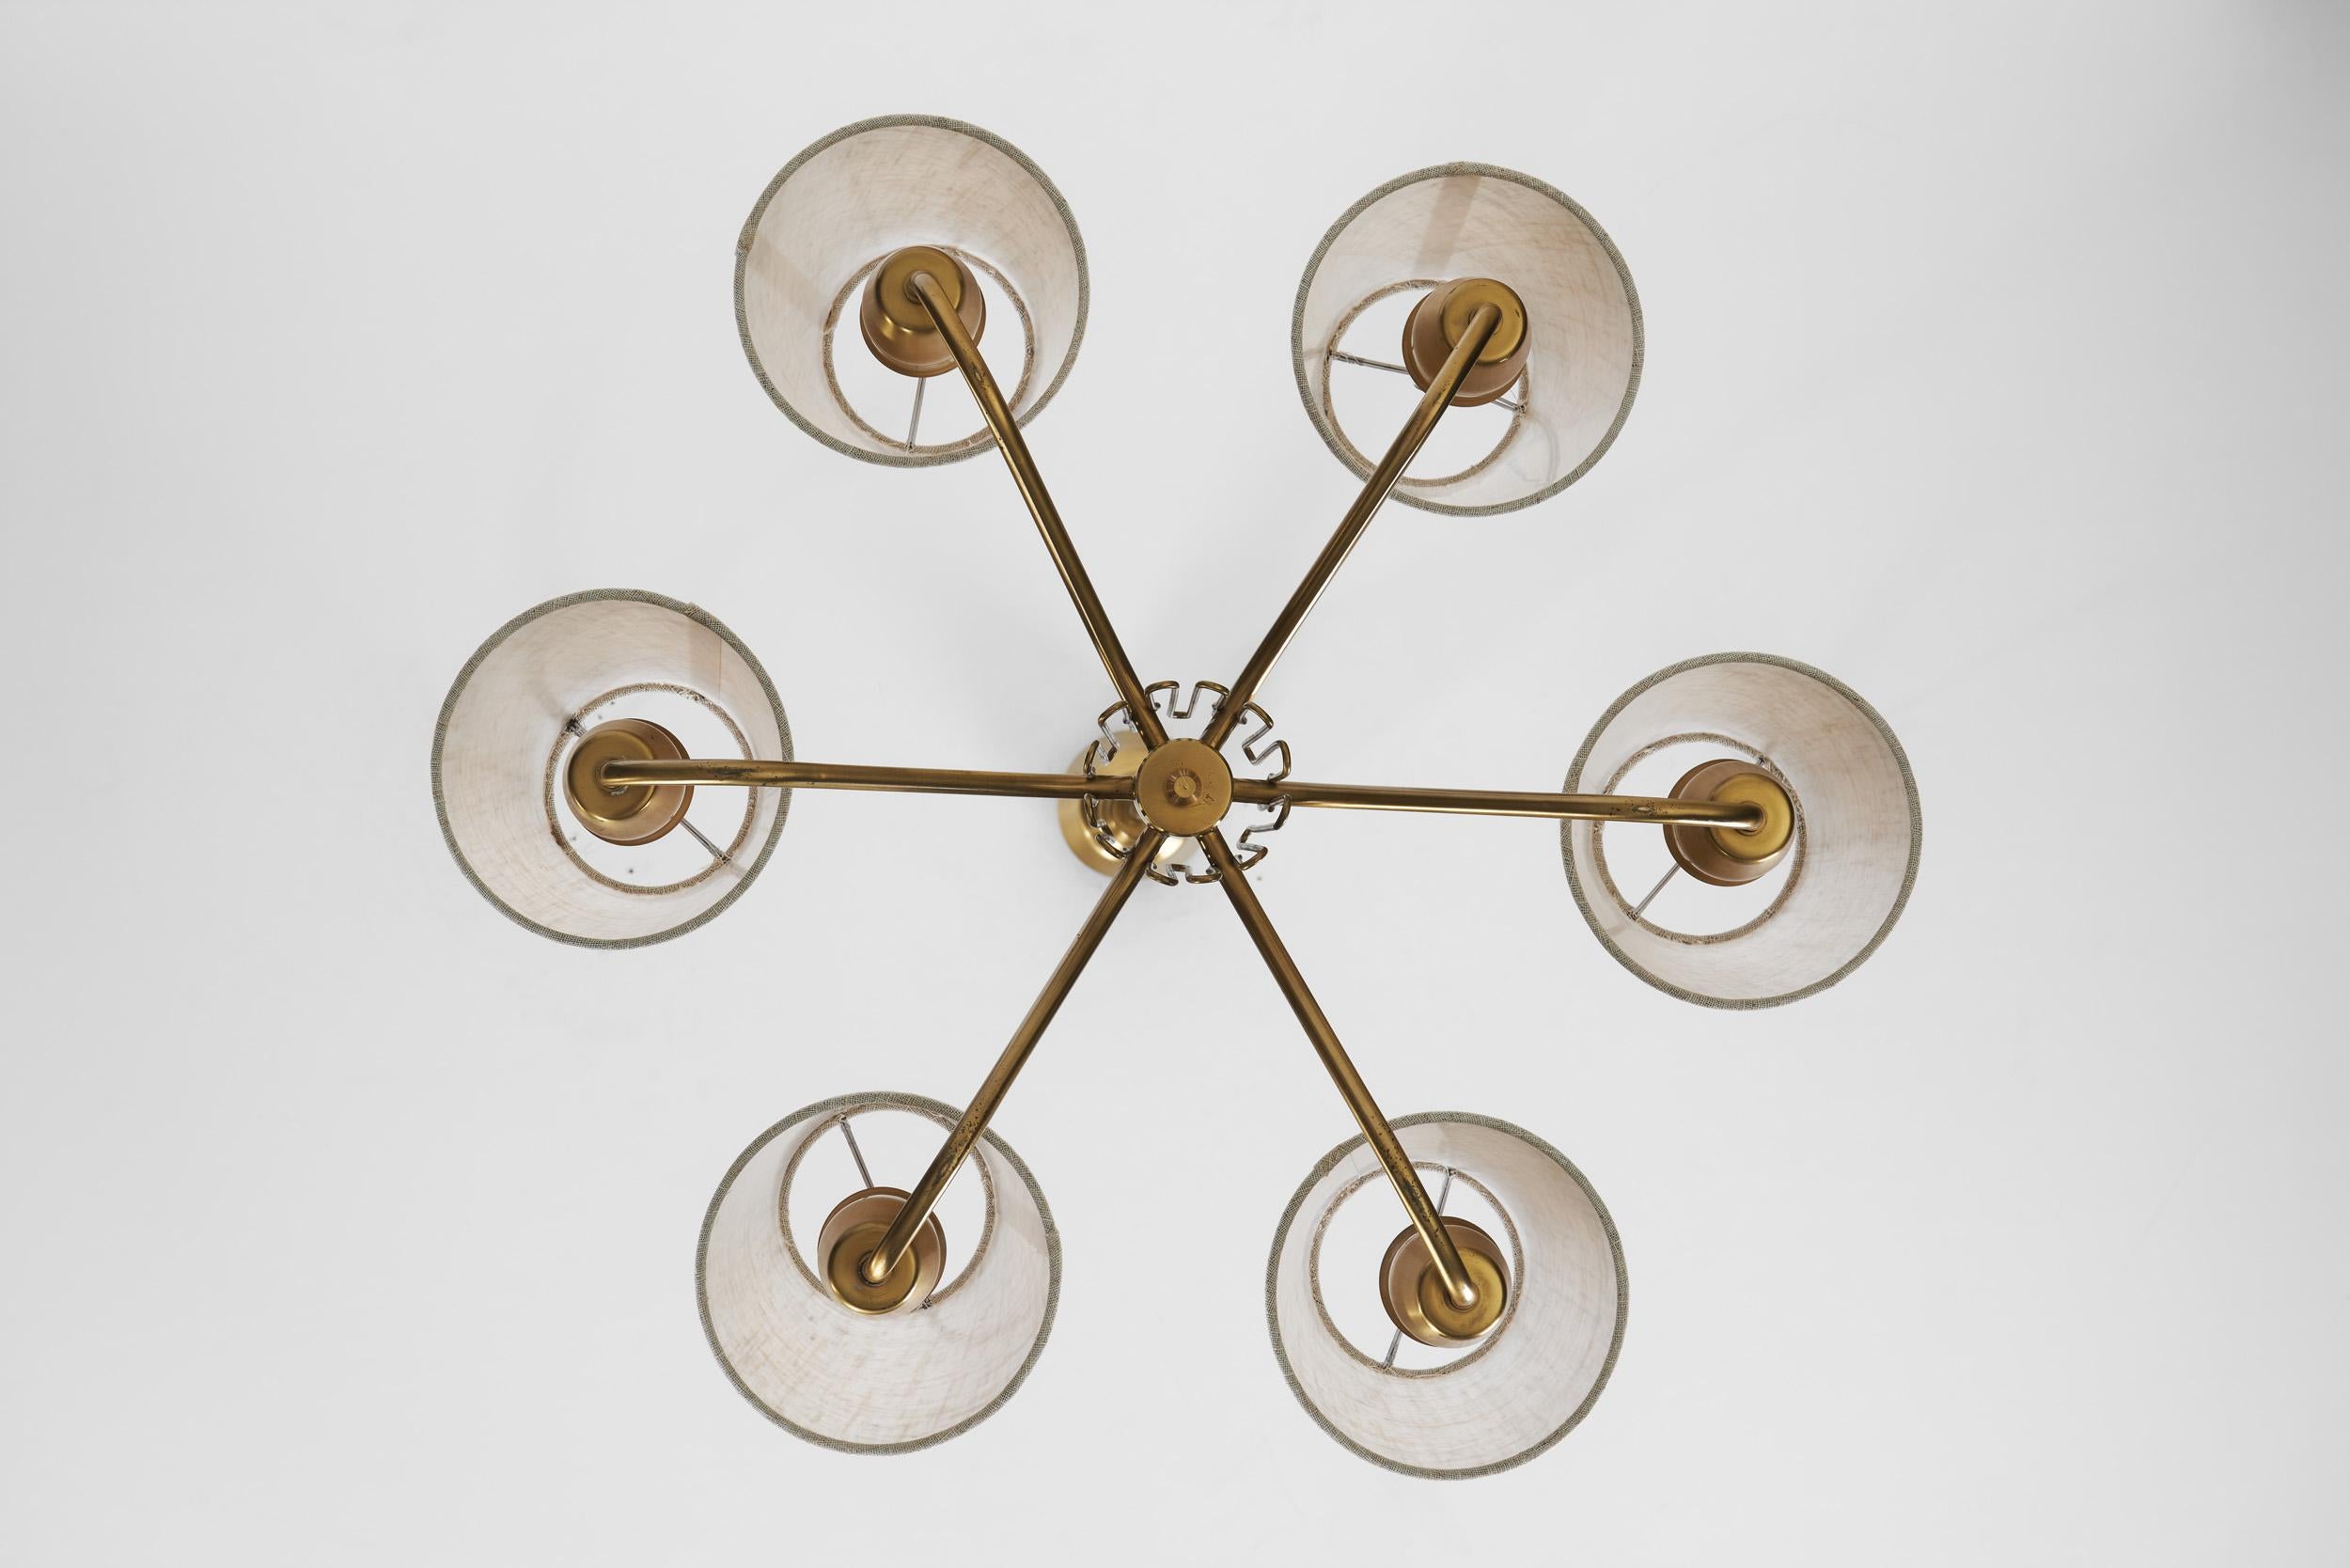 Swedish Modern Brass Ceiling Light with Fabric Shades, Sweden Mid-20th Century For Sale 15